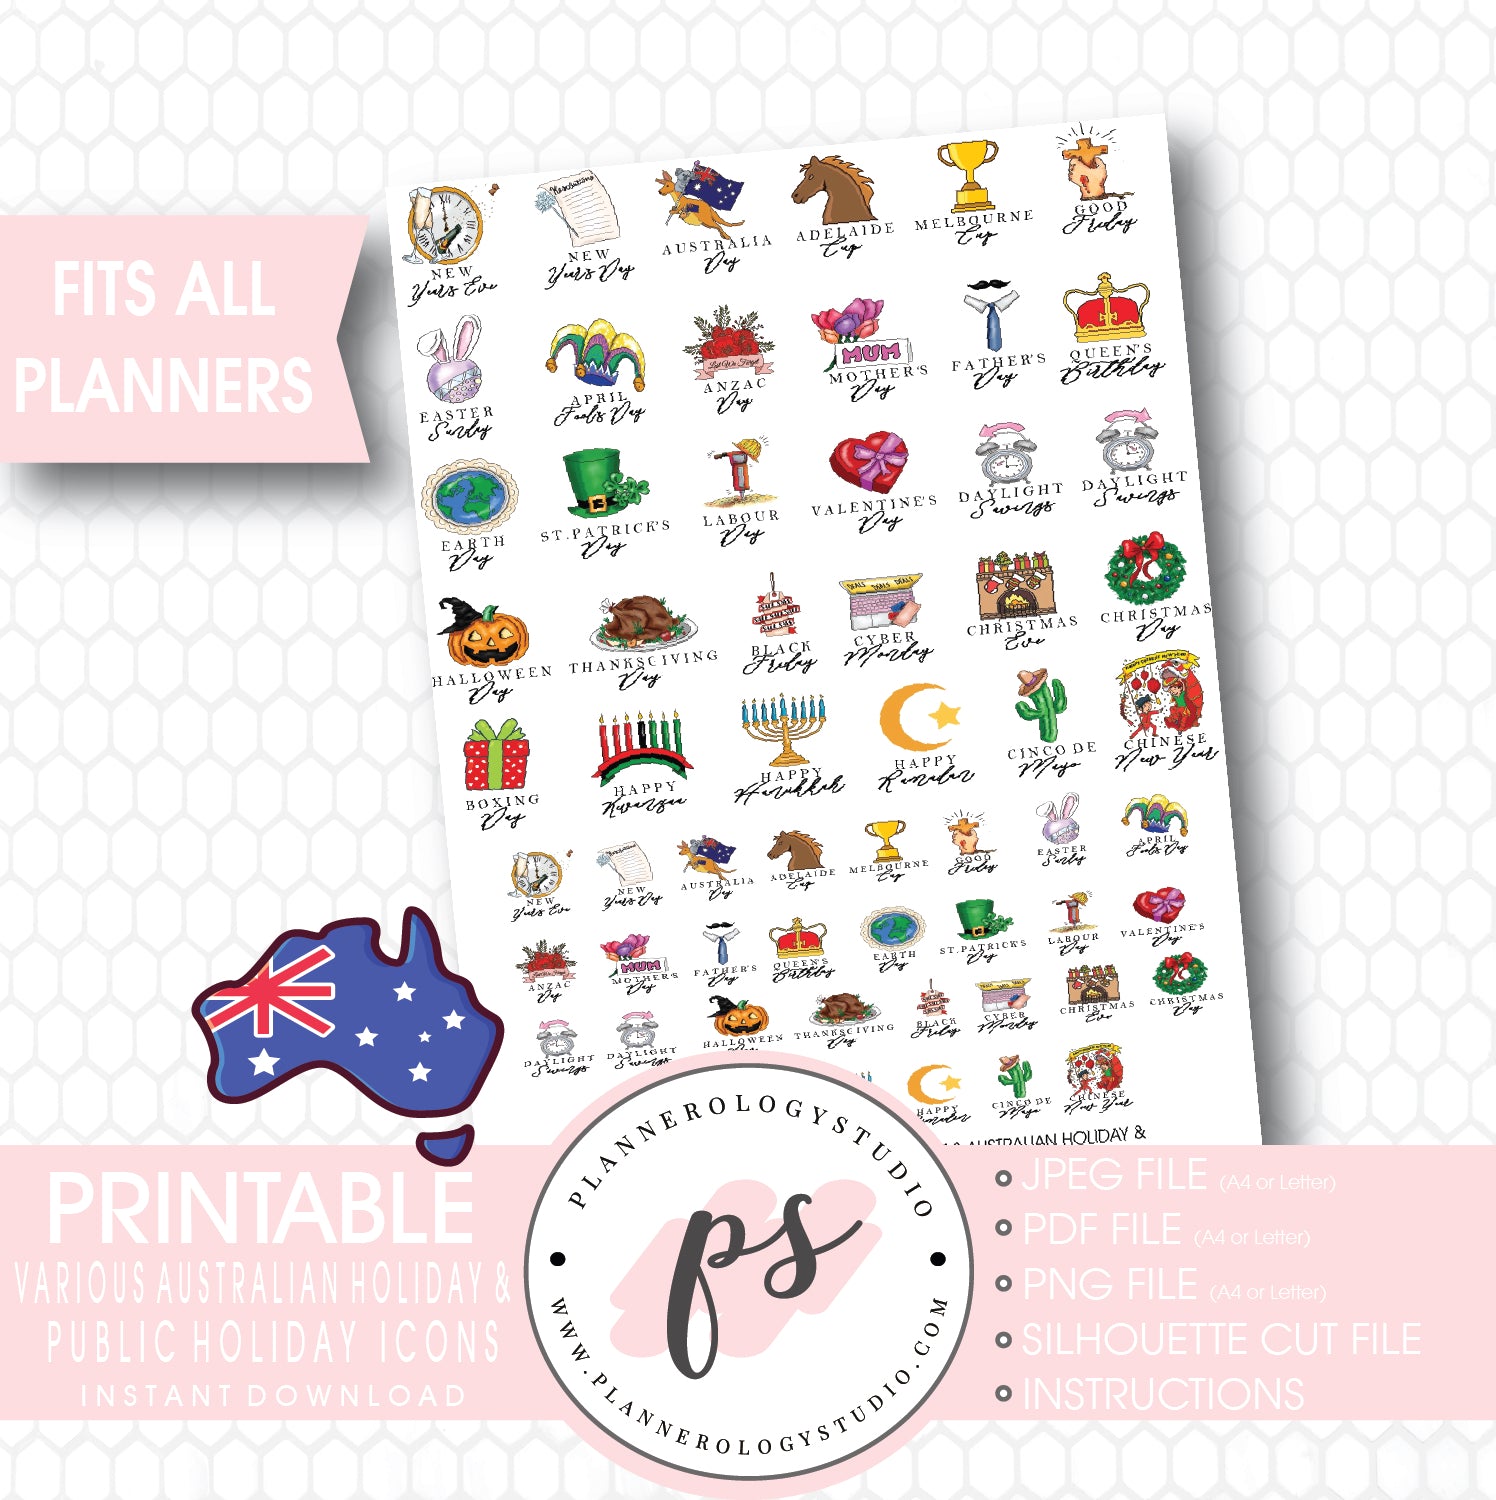 Various Australian Holiday & Public Holiday Icons Digital Printable Planner Stickers - Plannerologystudio